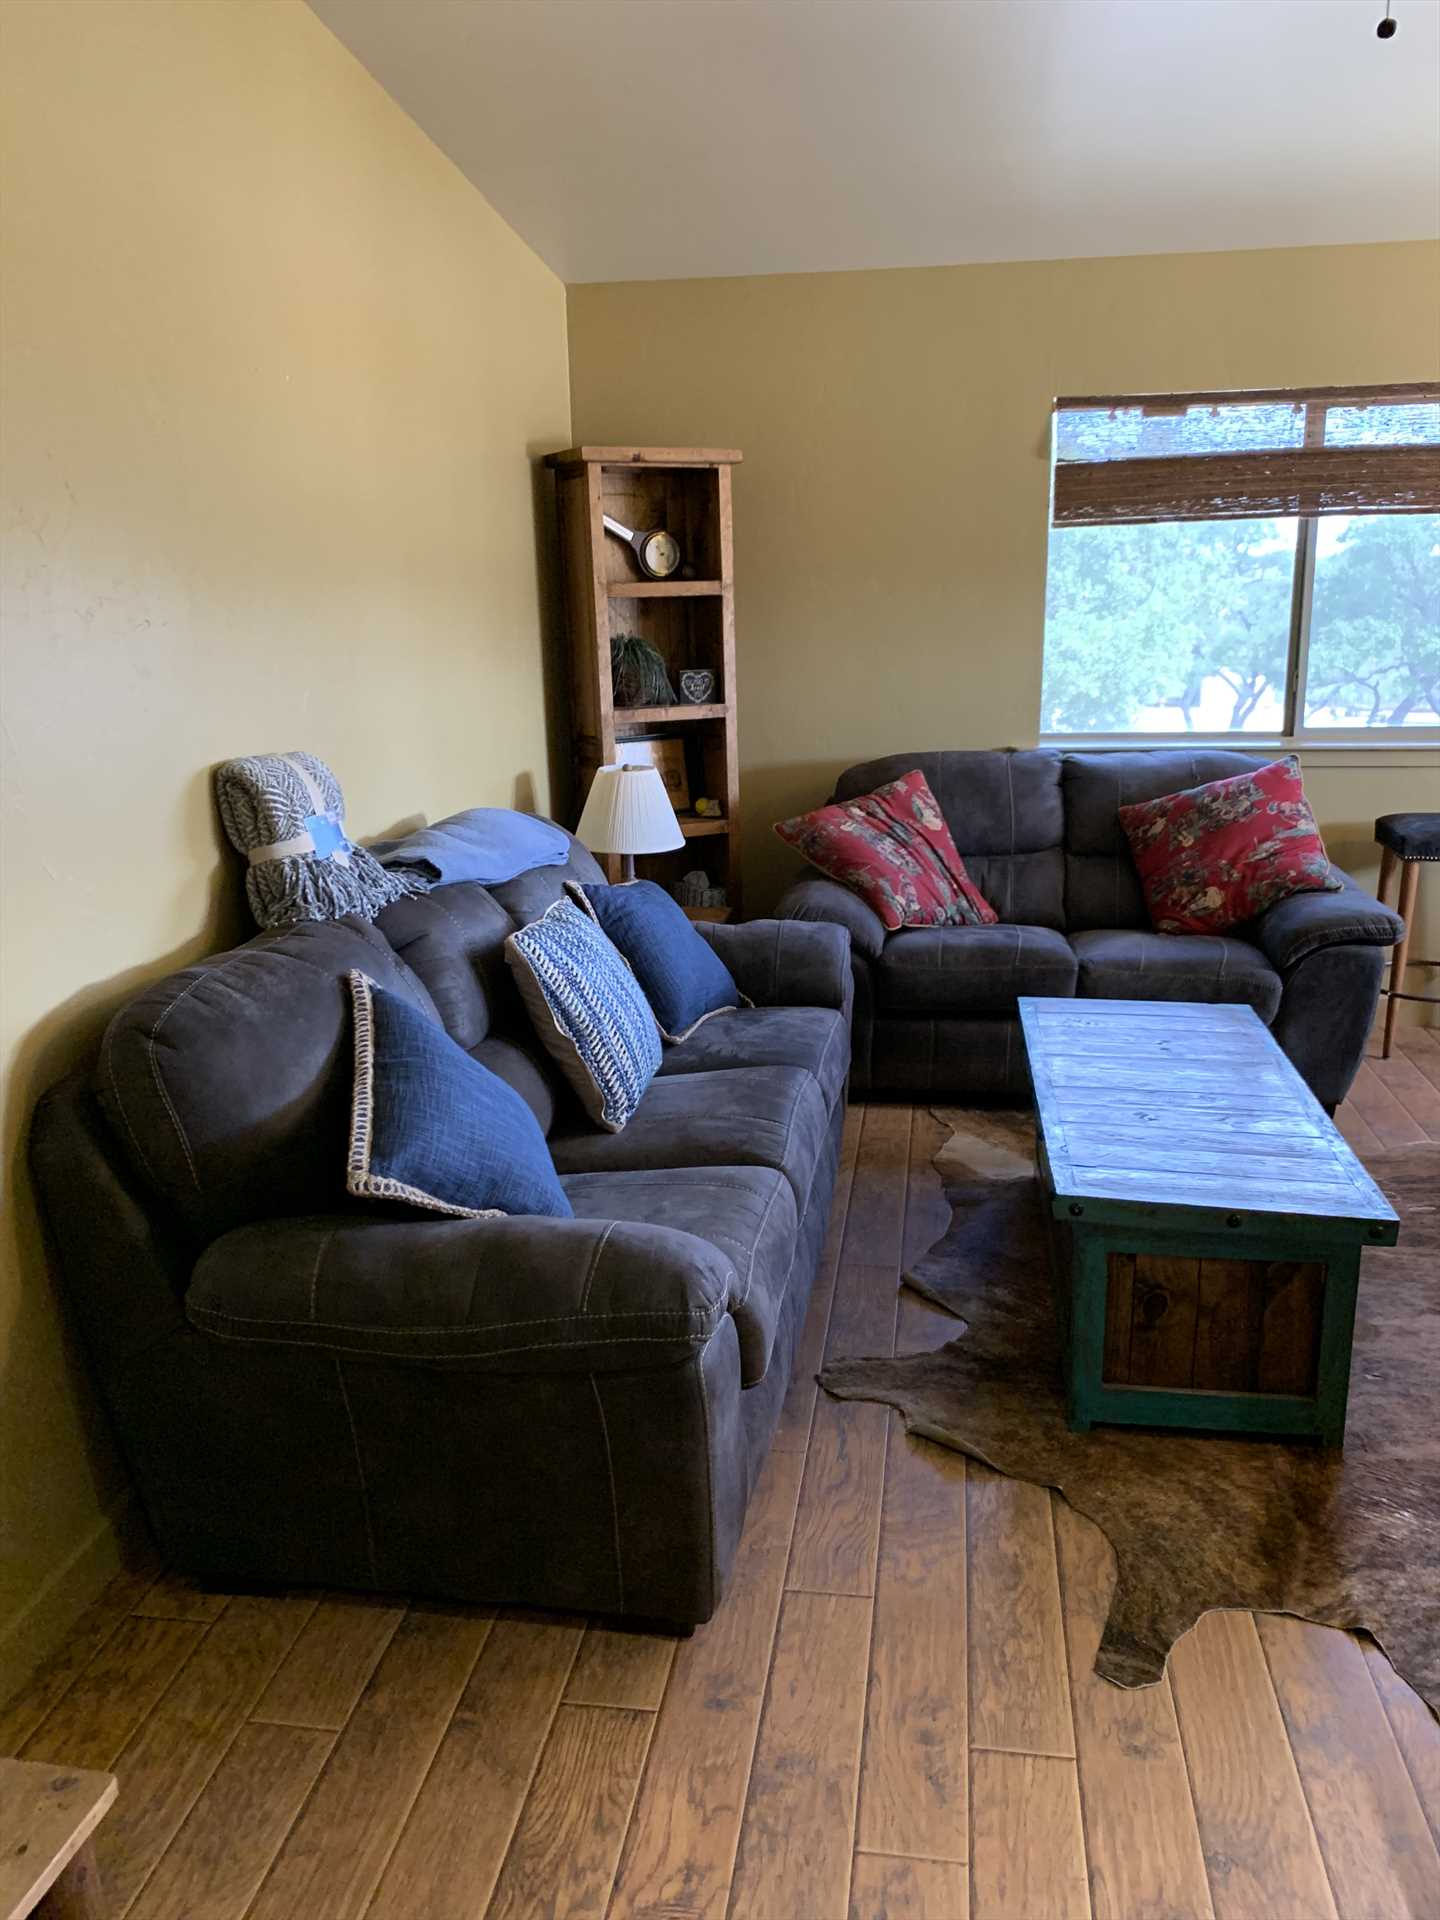                                                 The TV in the living area is equipped with satellite and cable service, and Wifi Internet (shared with the rest of the ranch) is available, too.